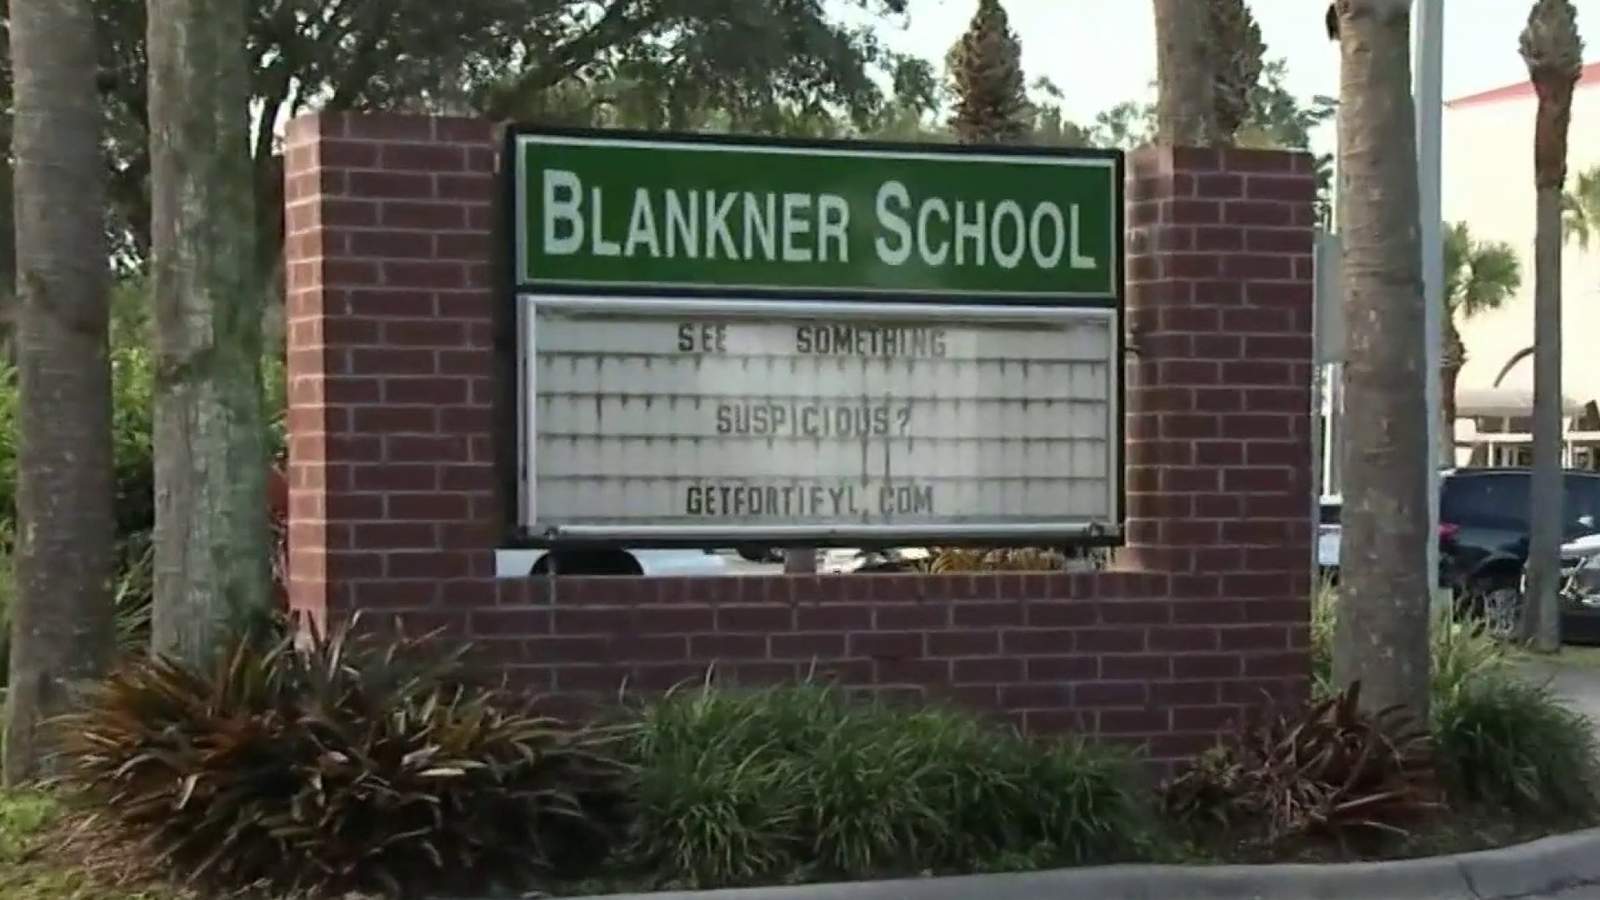 Blankner School shifts to online learning after positive COVID-19 results